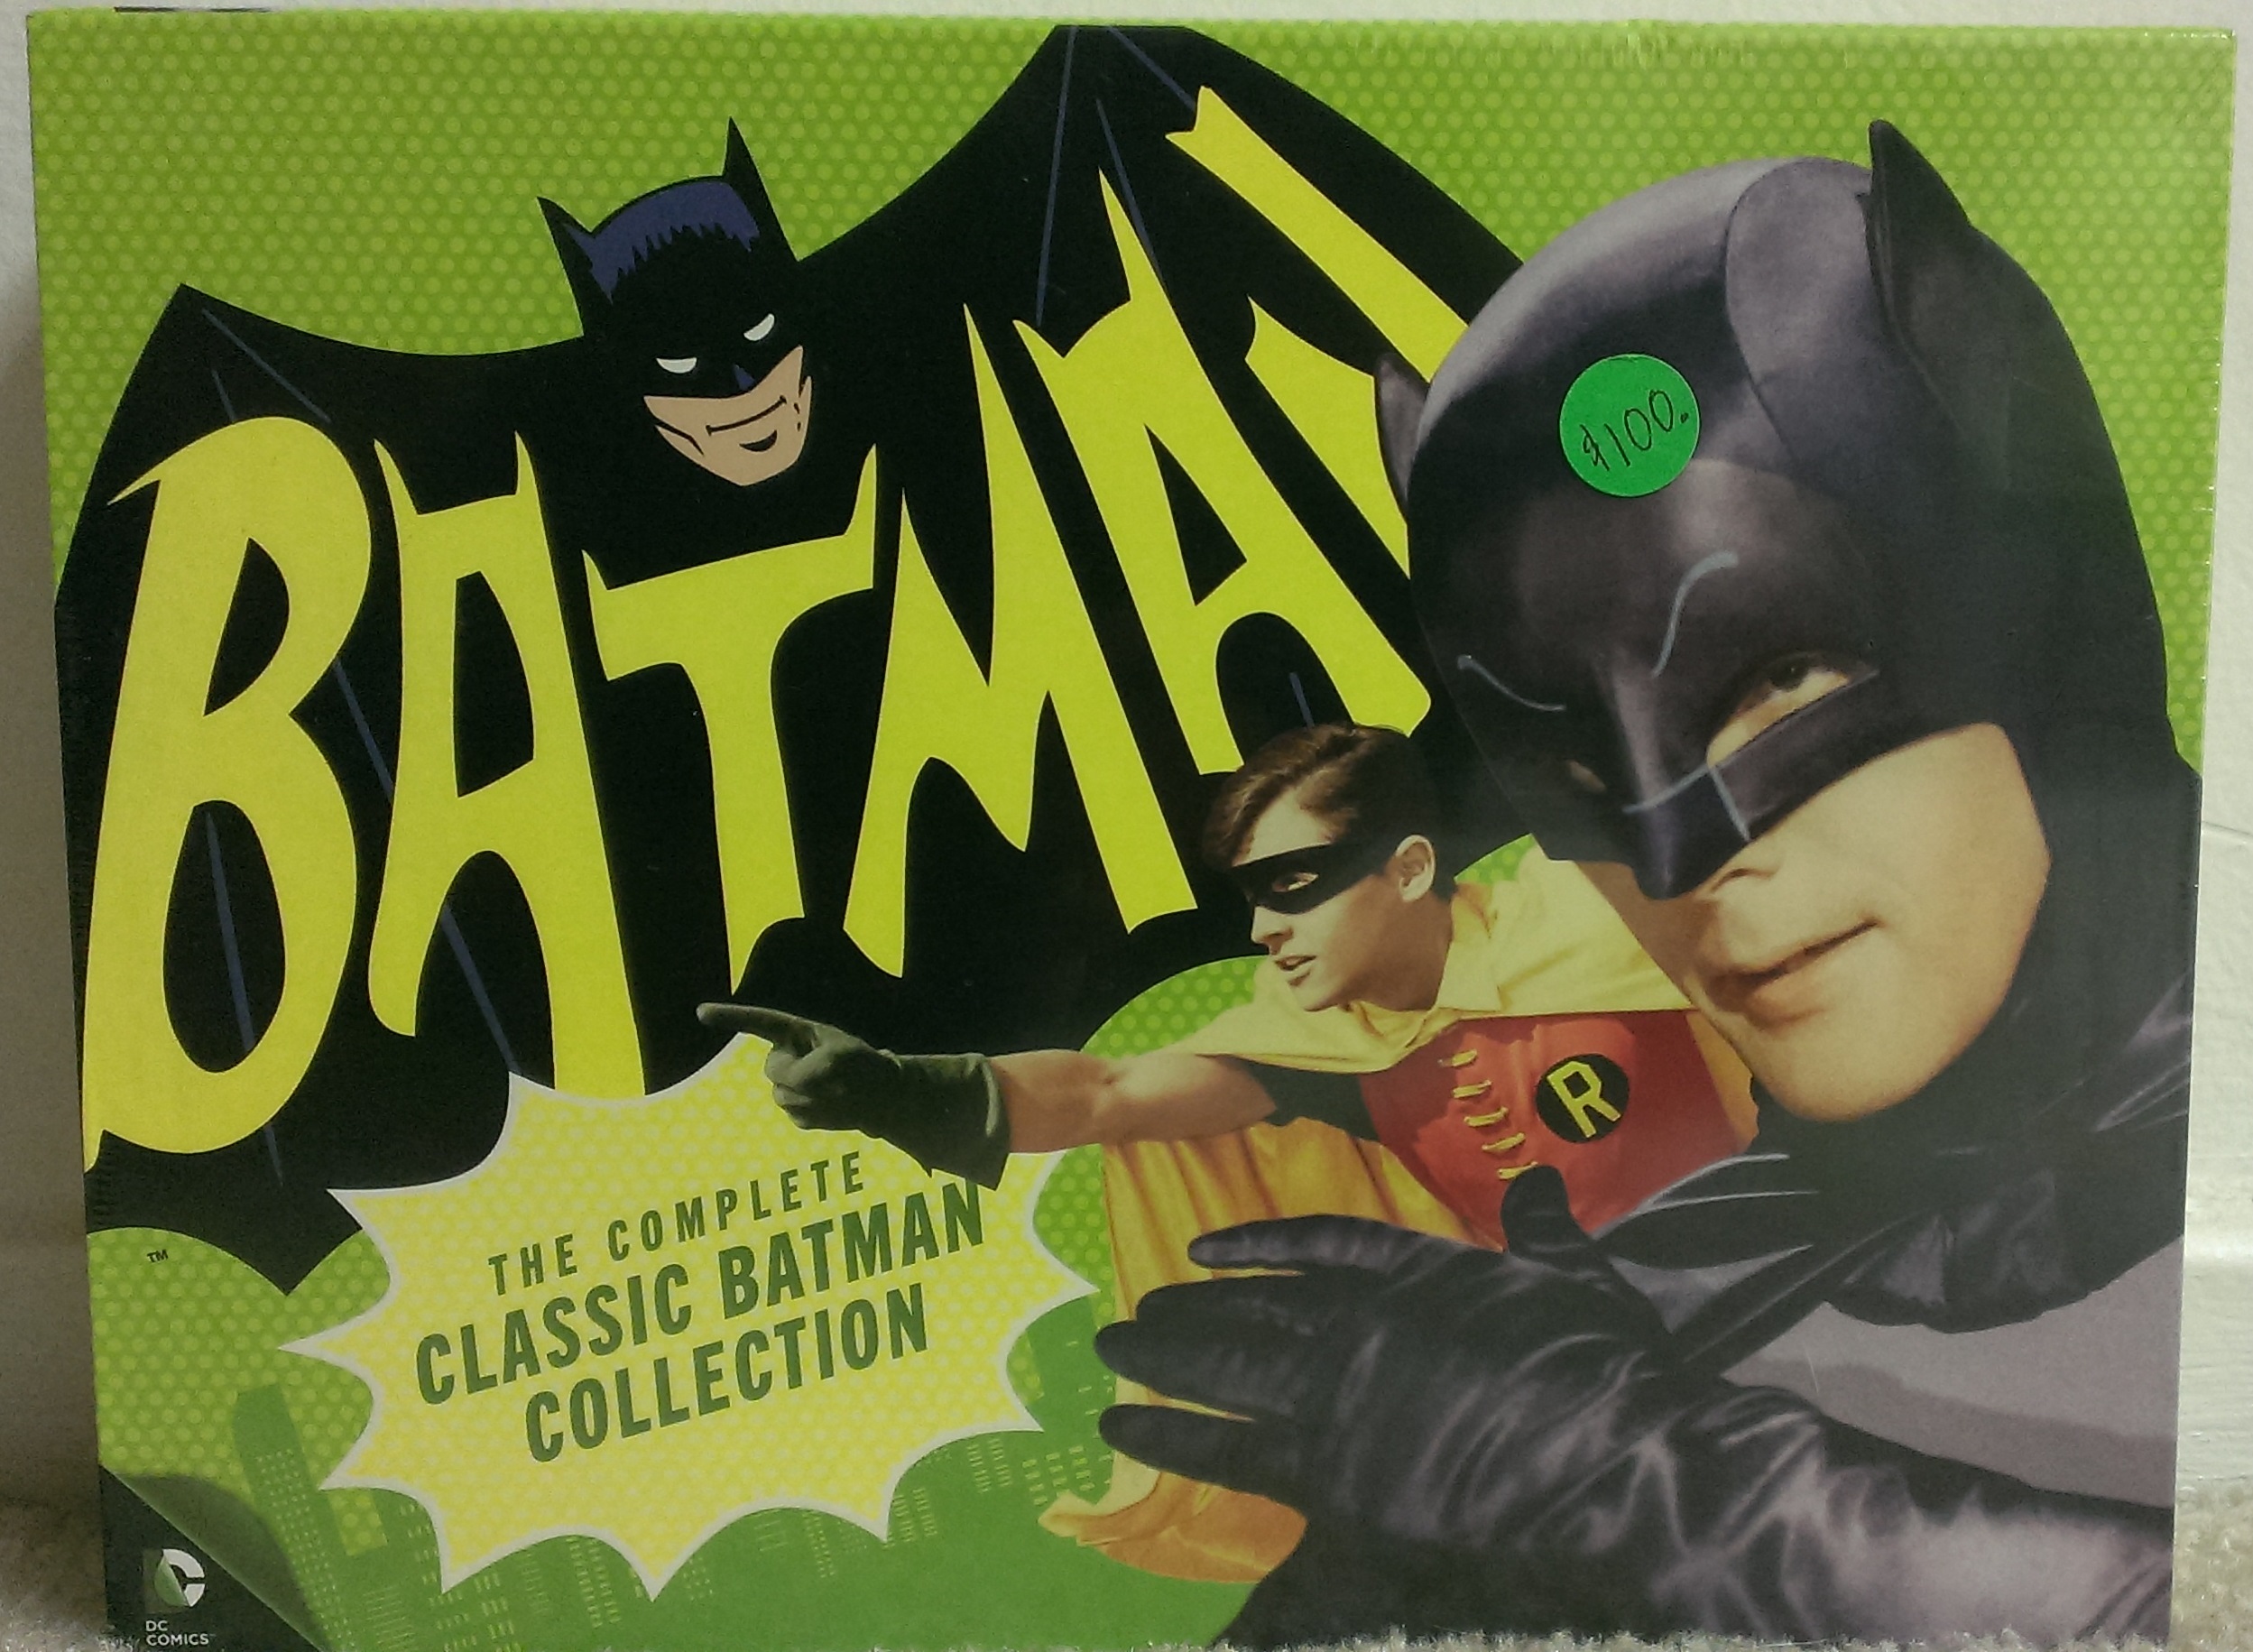 Thrift Justice: YSE – Holy Deal, Batman!